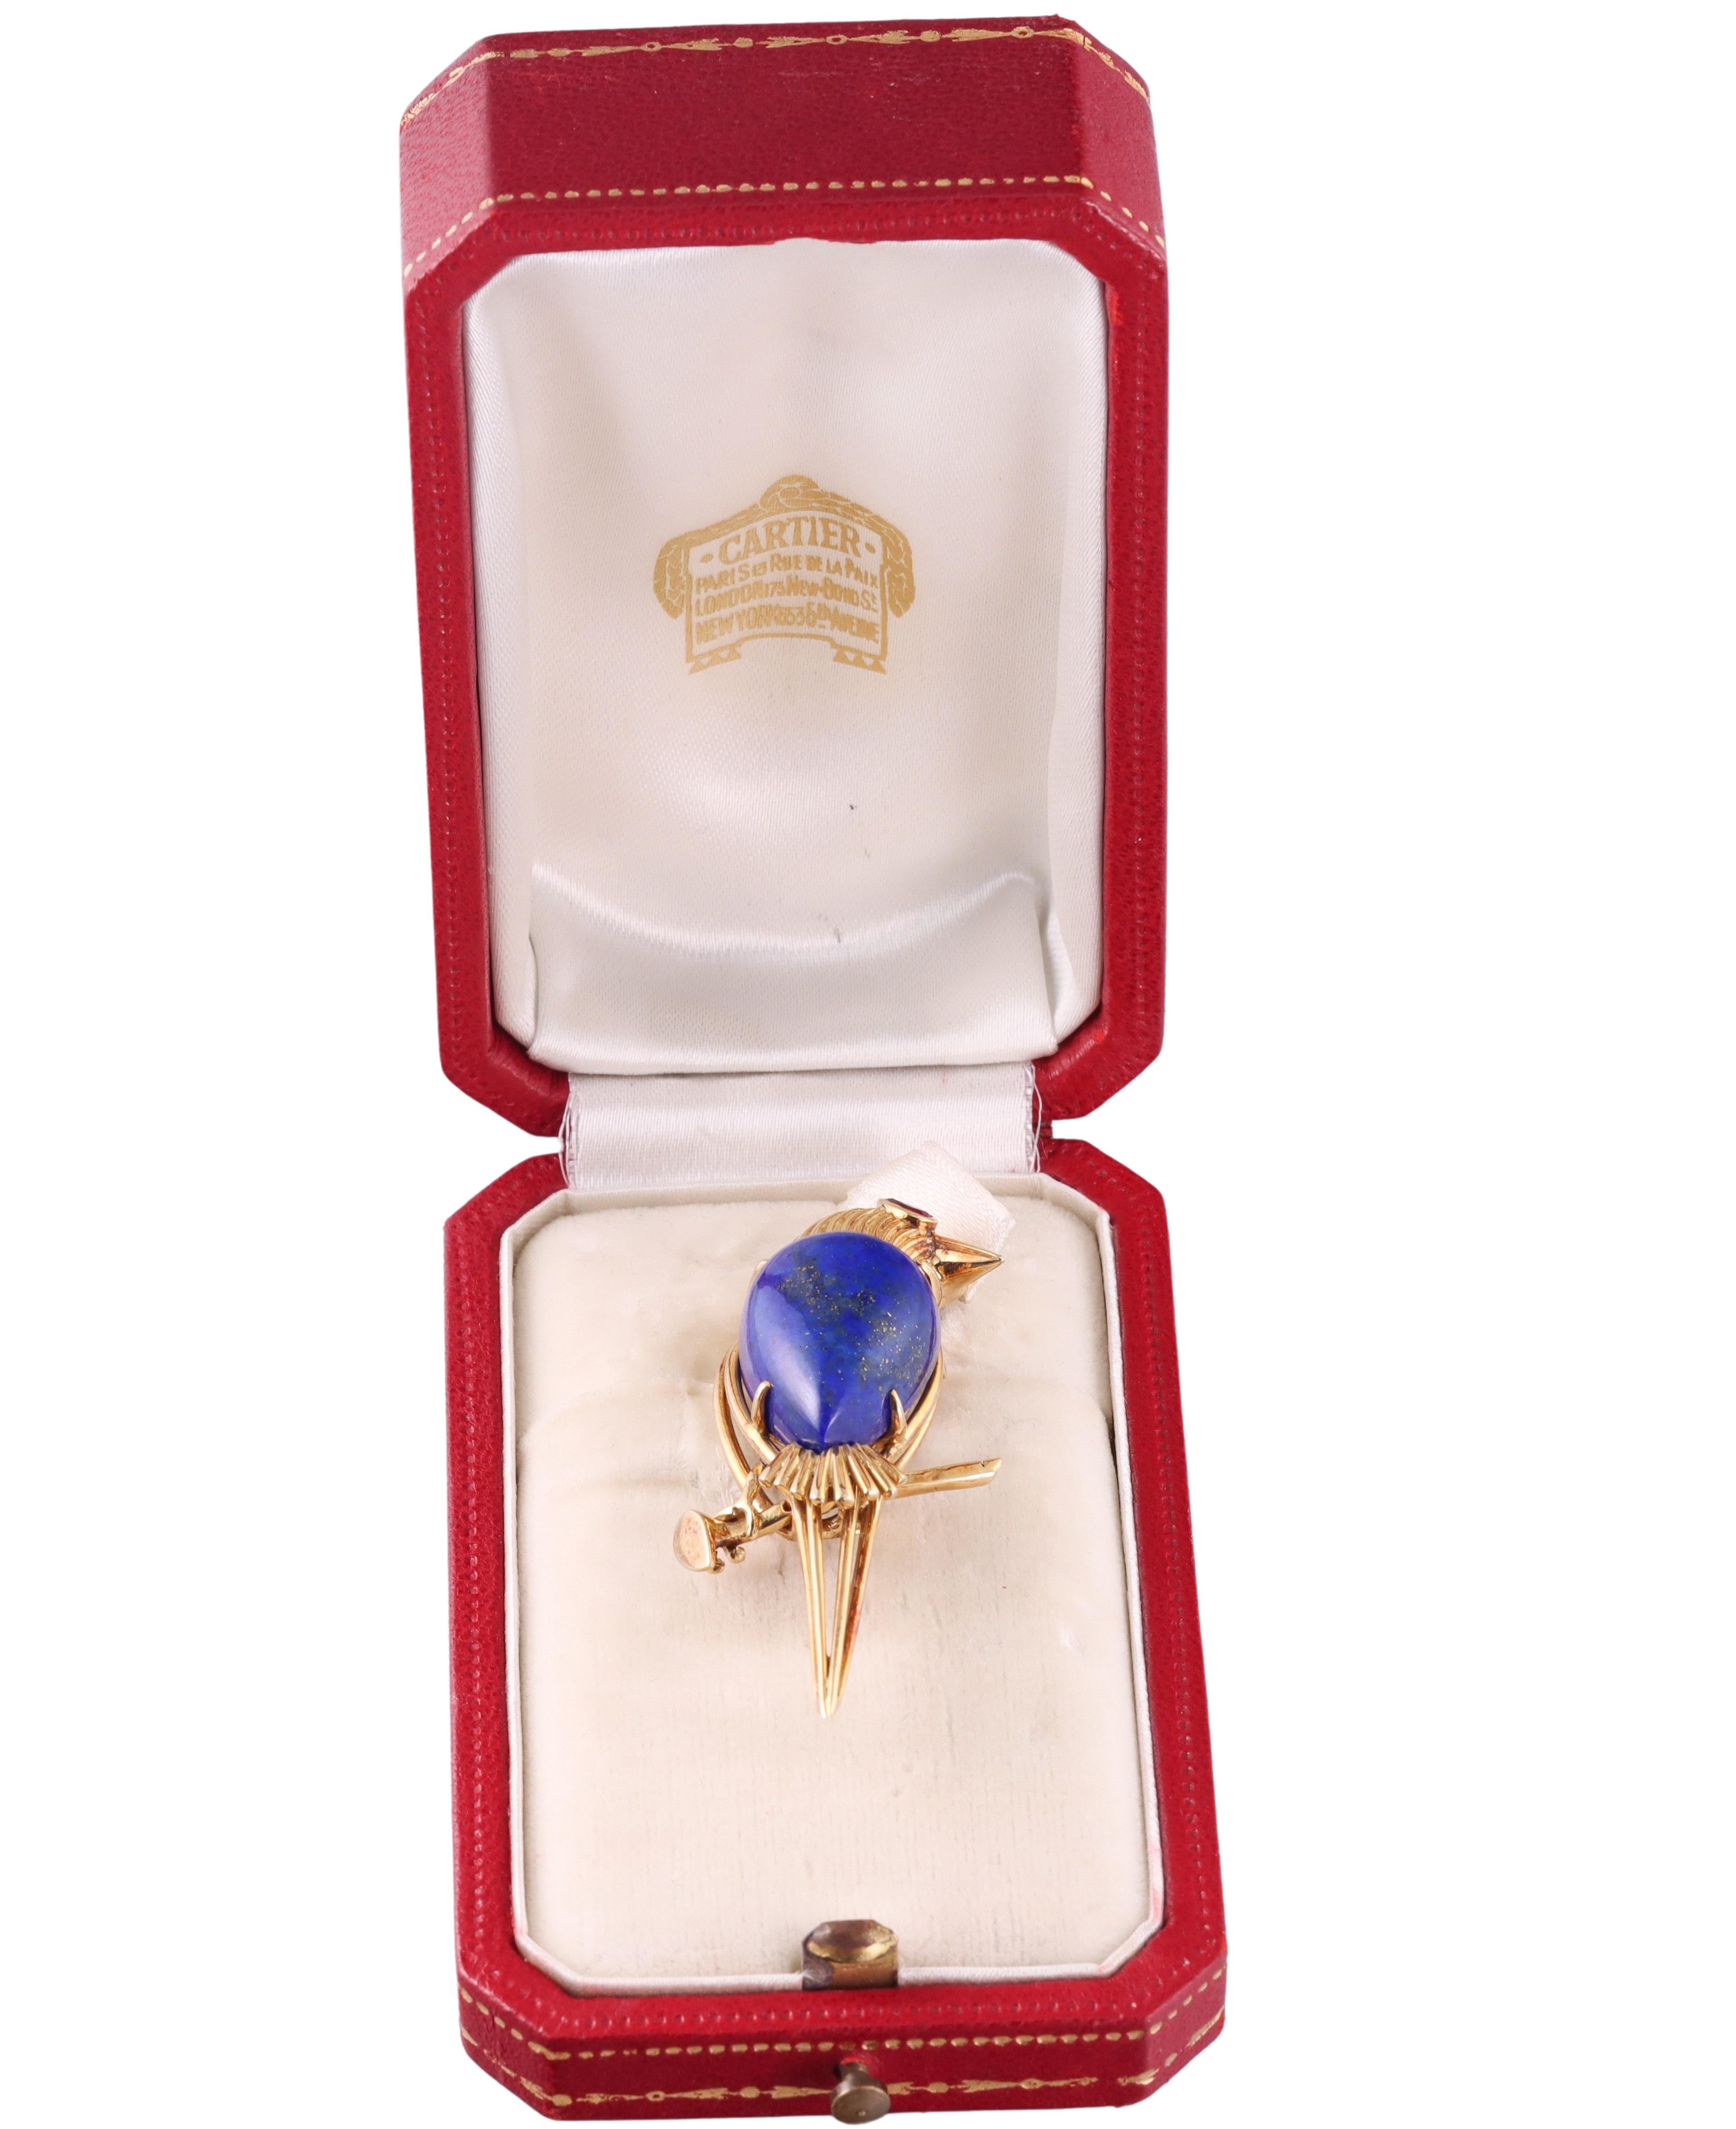 Vintage, circa 1960s 18k gold bird brooch by Cartier, set with lapis lazuli and a ruby eye. The brooch measures 1 7/8